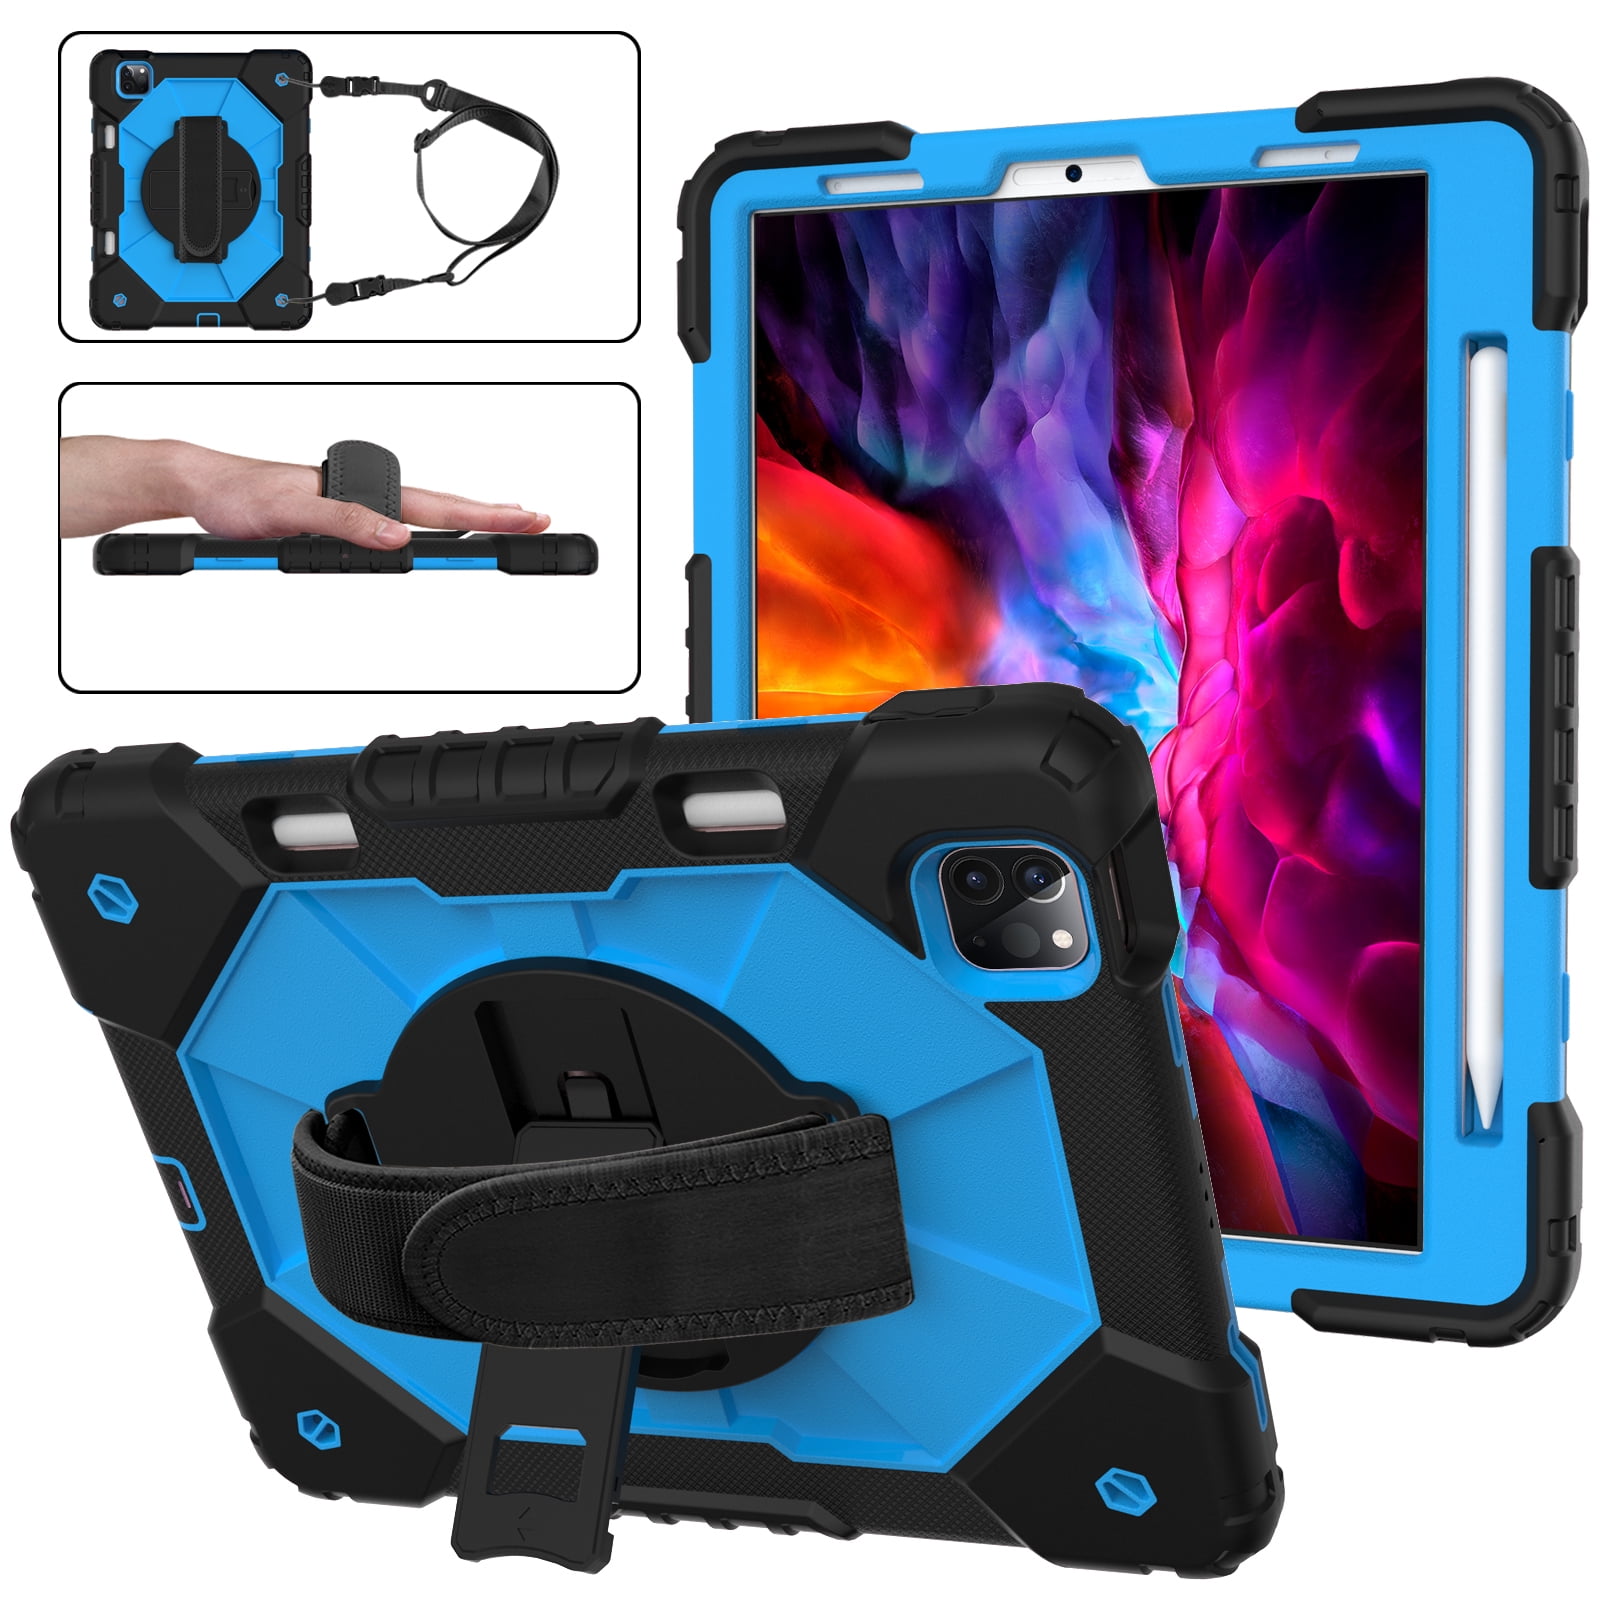 Dteck Case for iPad Air 5th 4th Generation 10.9-inch,iPad Pro 11-inch  2021/2020/2018 Shockproof Rubber Heavy Duty 3-Layer Protection Armor  Kickstand